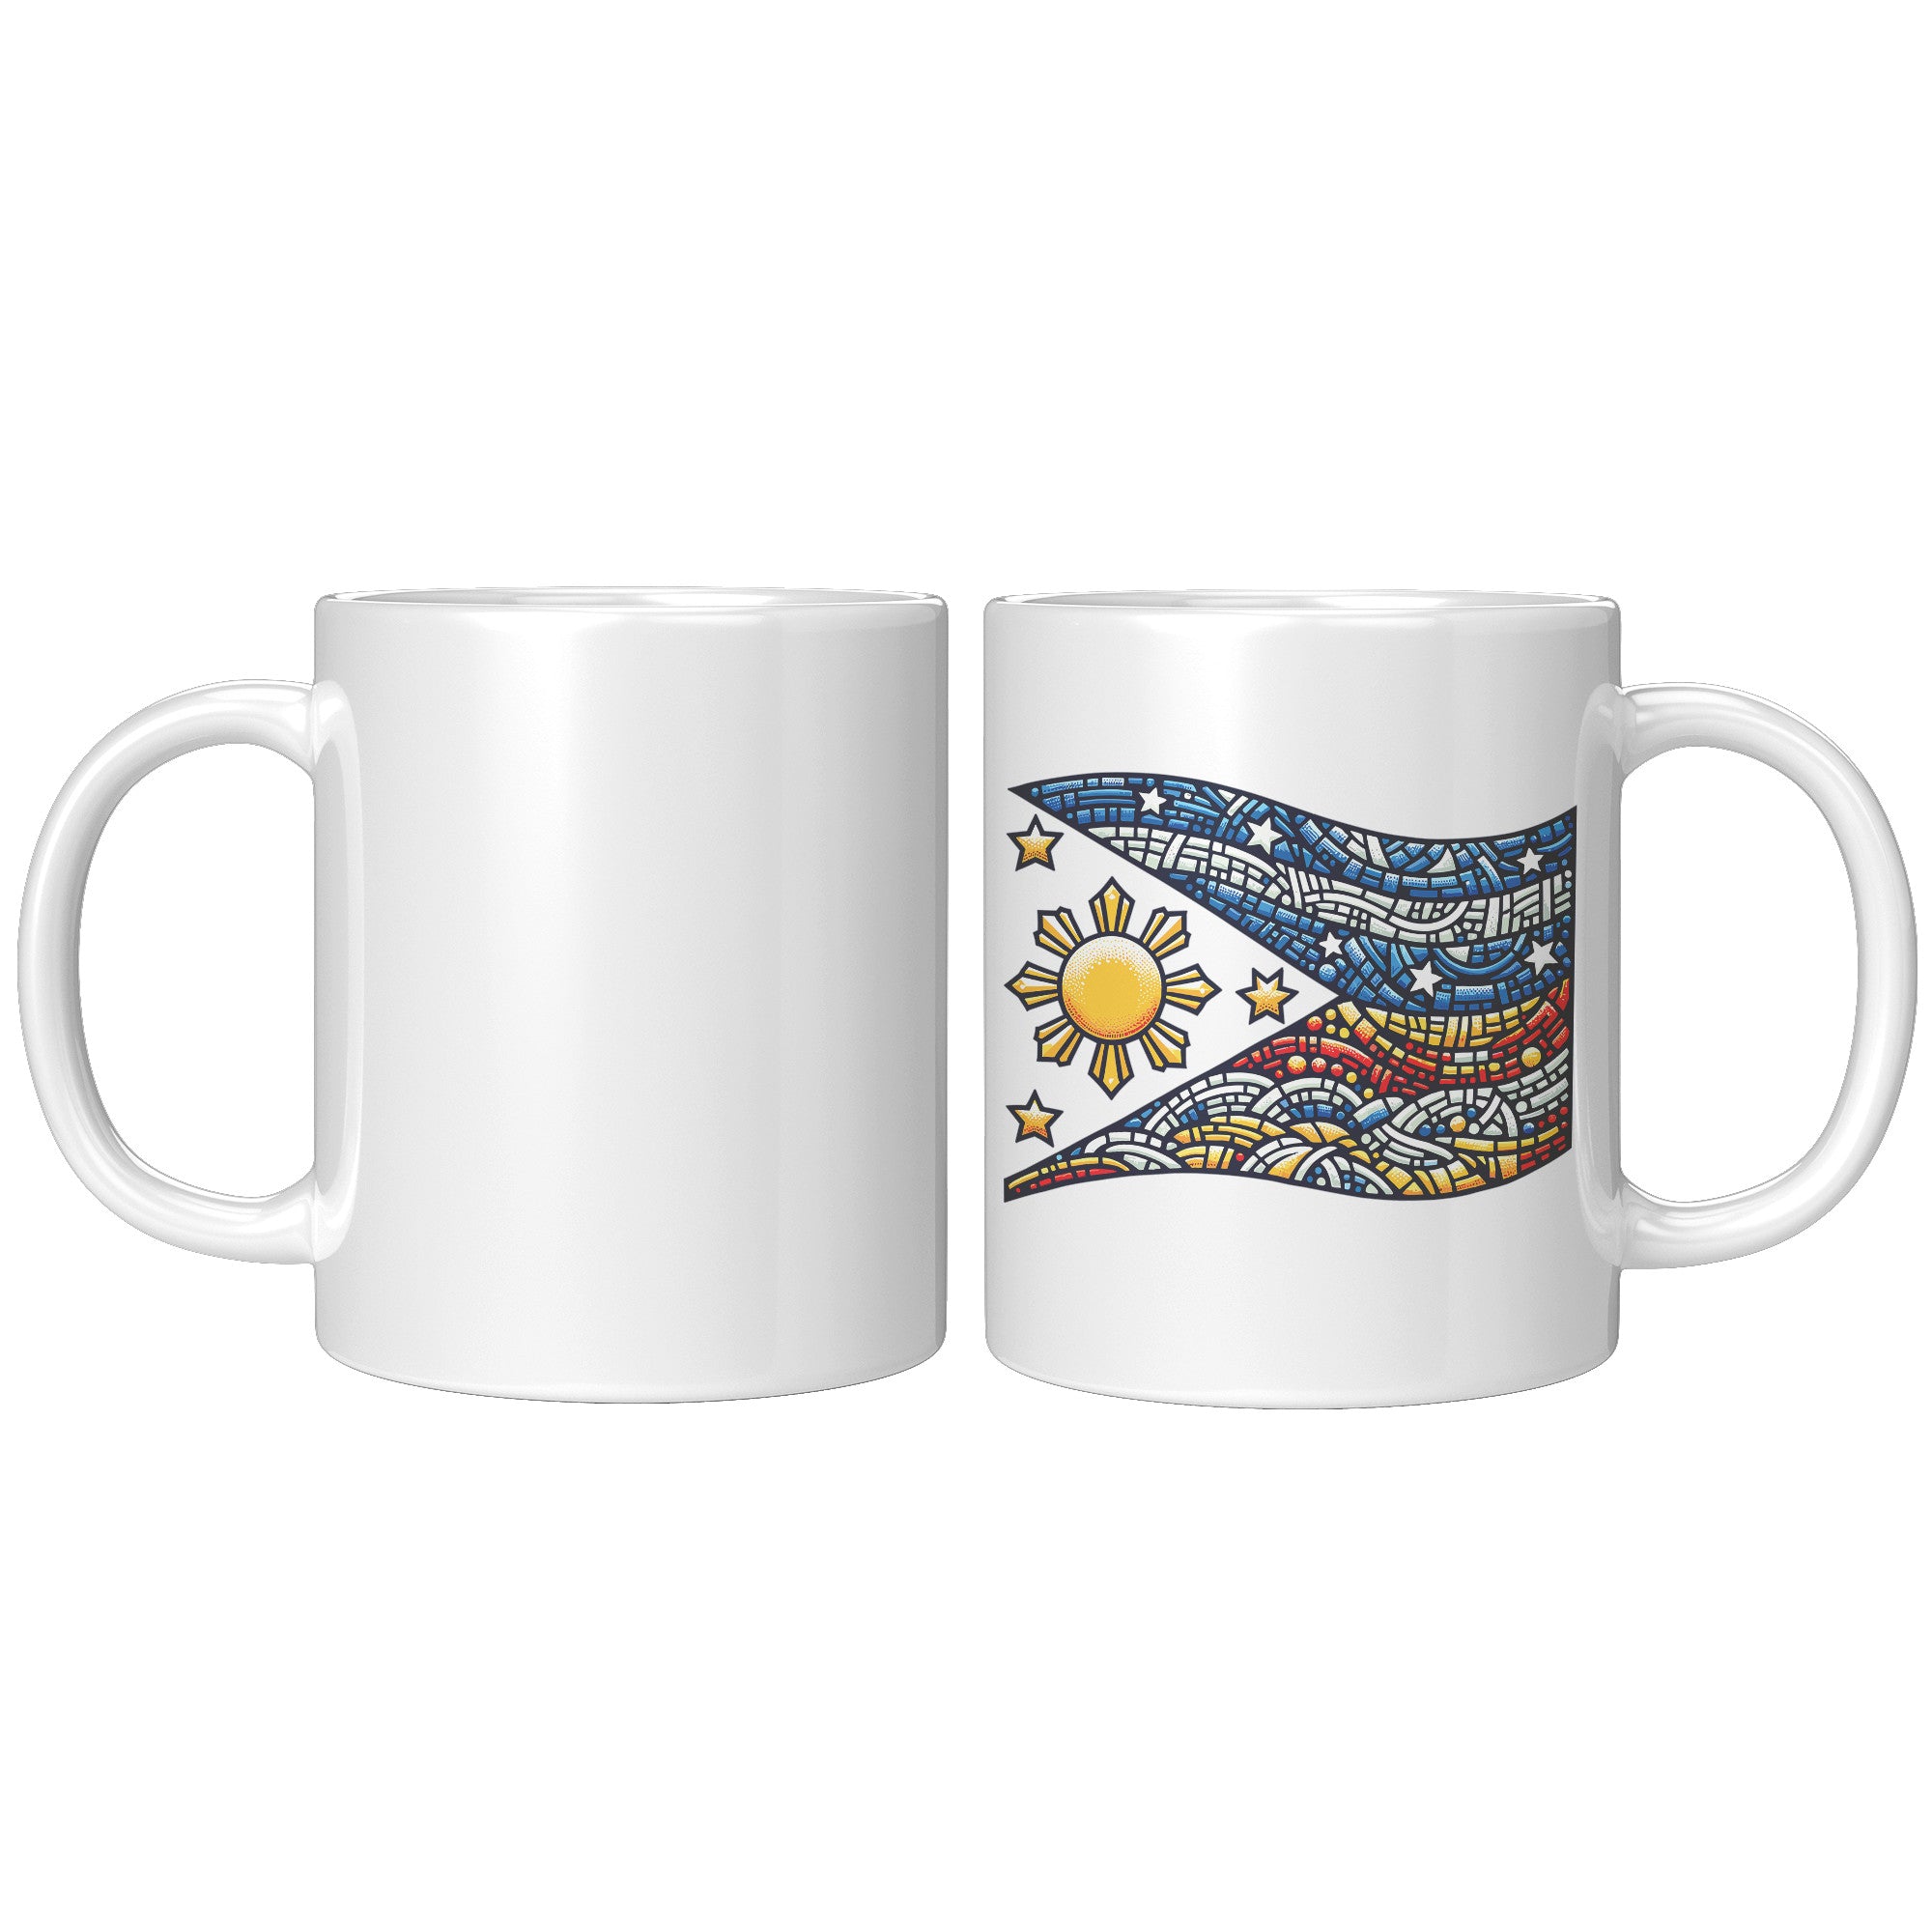 Proudly Pinoy Coffee Mug - Vibrant Filipino Flag Design - Patriotic Gift for Filipinos - Celebrate Heritage with Every Sip!" - F